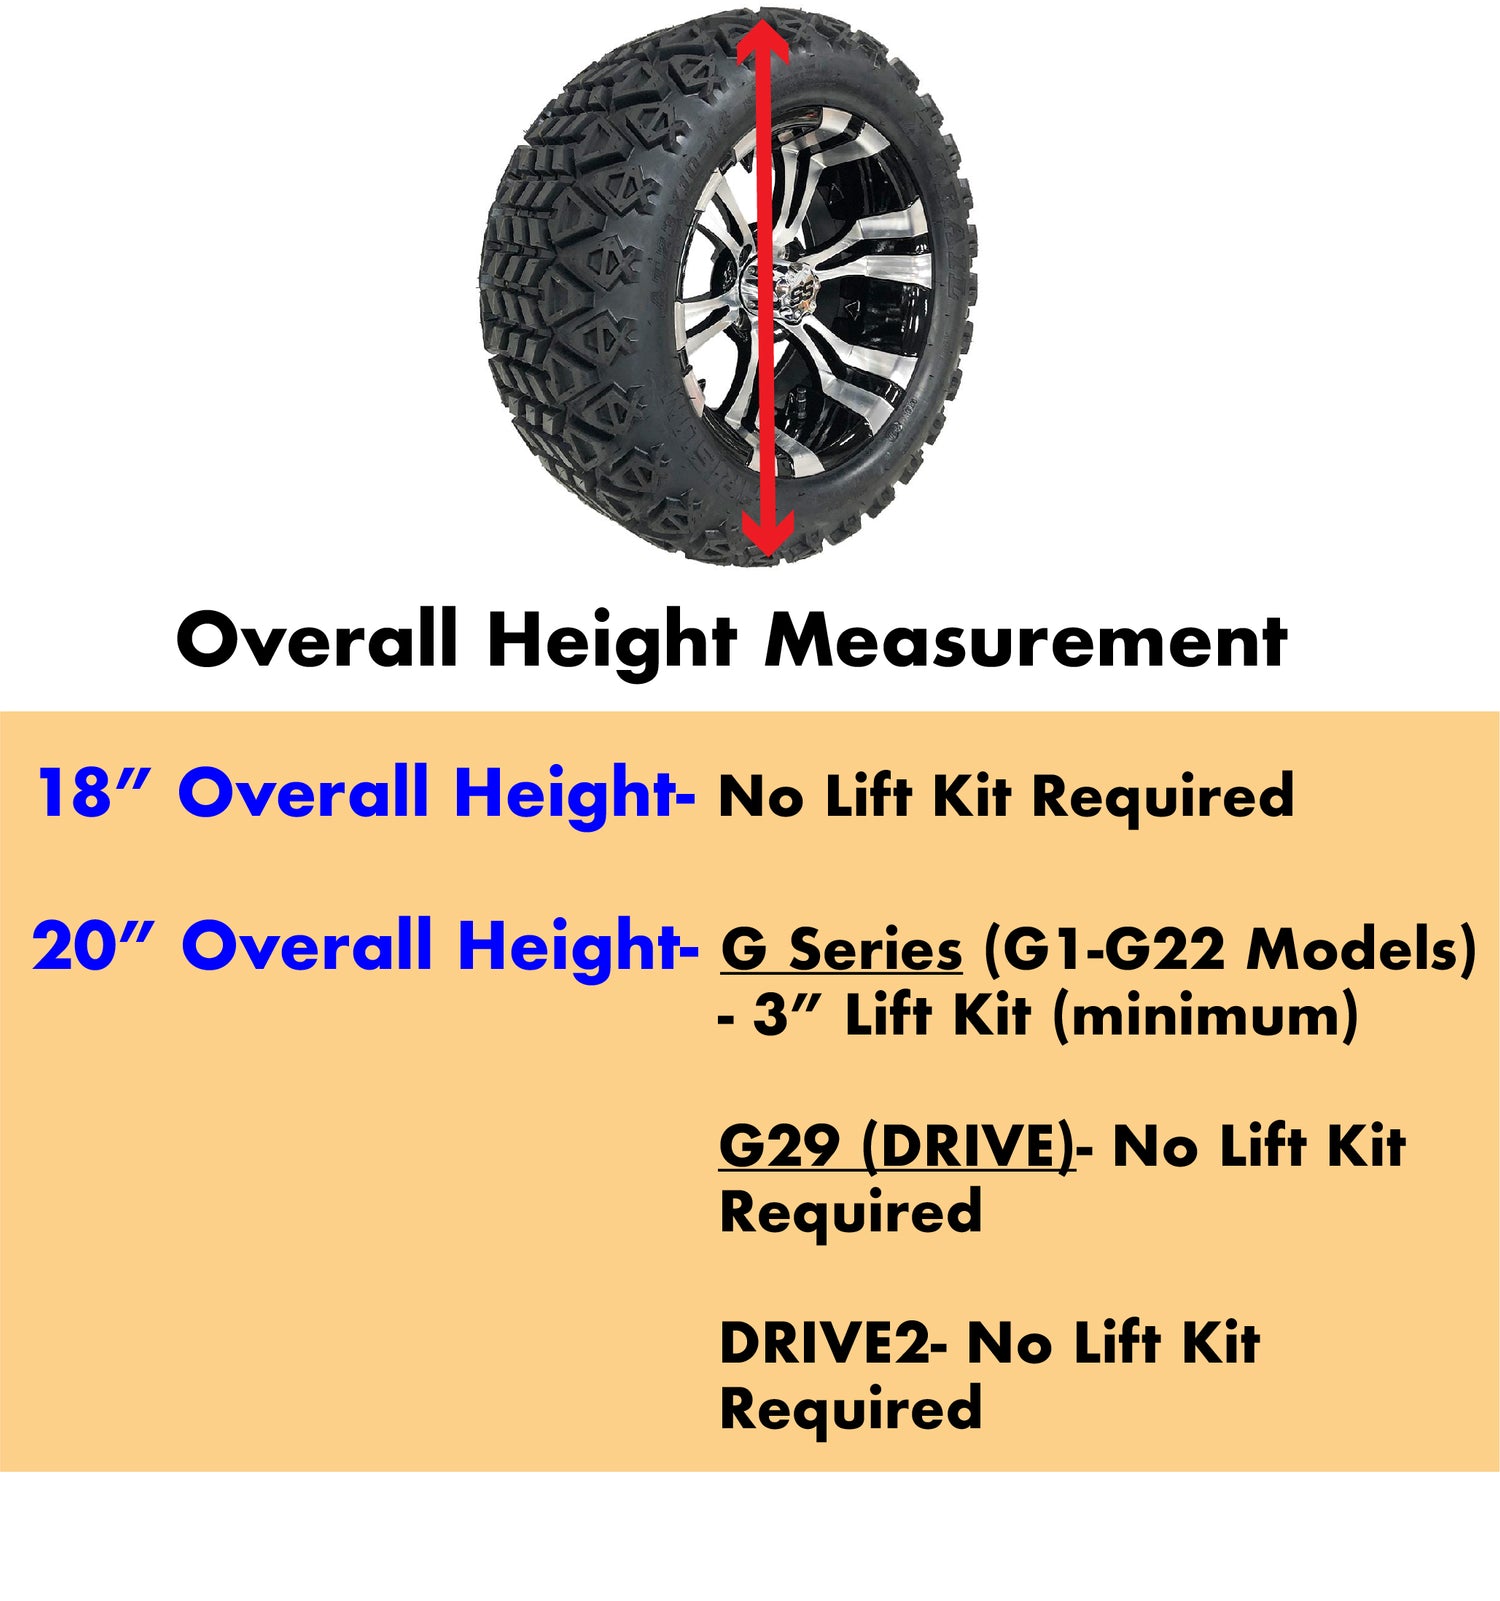 Yamaha Wheel and Tire Measurements for 18"-20" in Overall Diameter